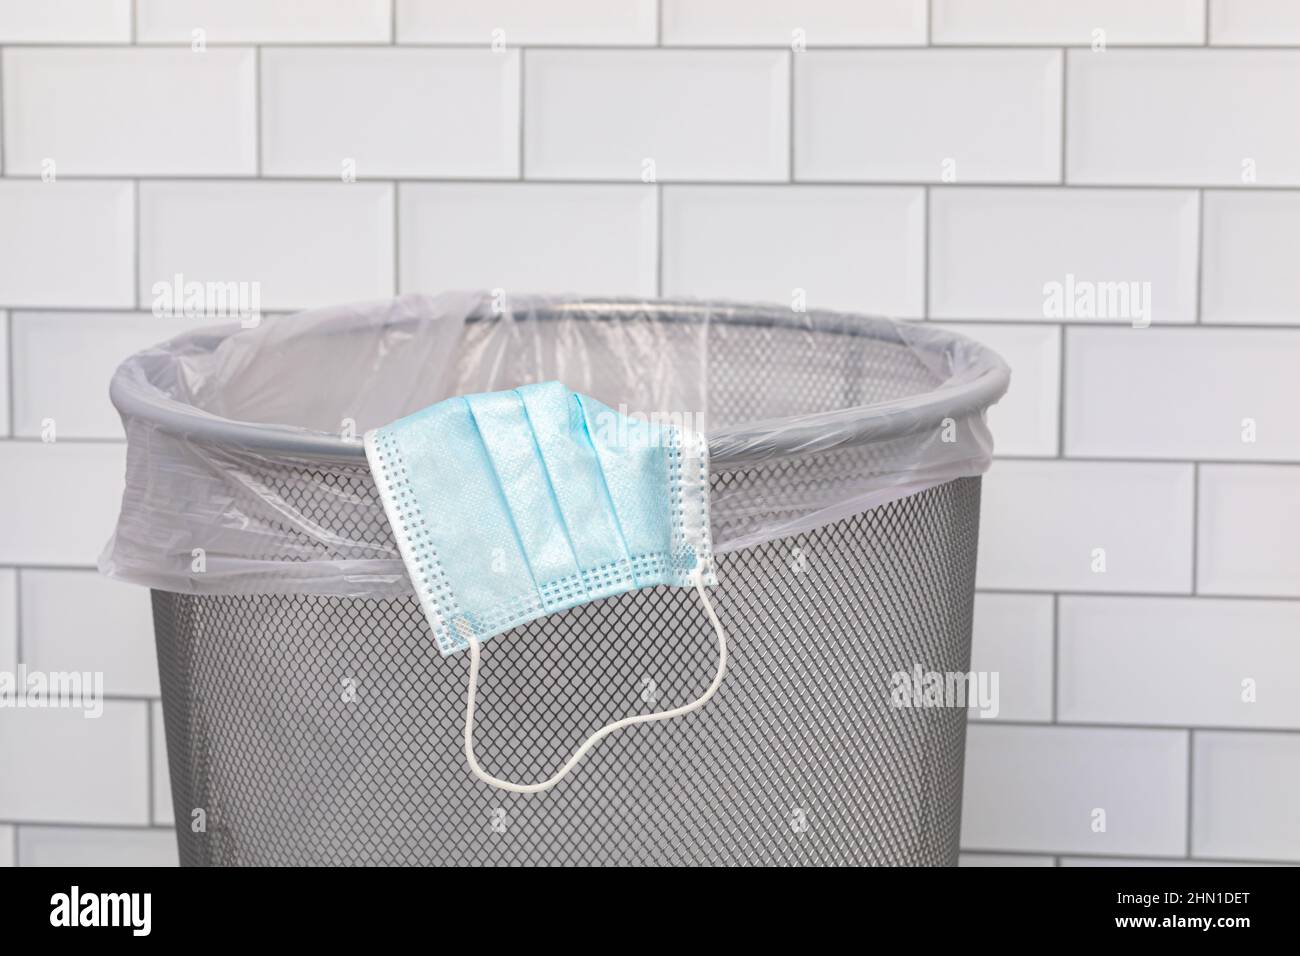 Blue surgical face mask in garbage can. Covid-19 face covering mandate, disposal and requirement. Stock Photo